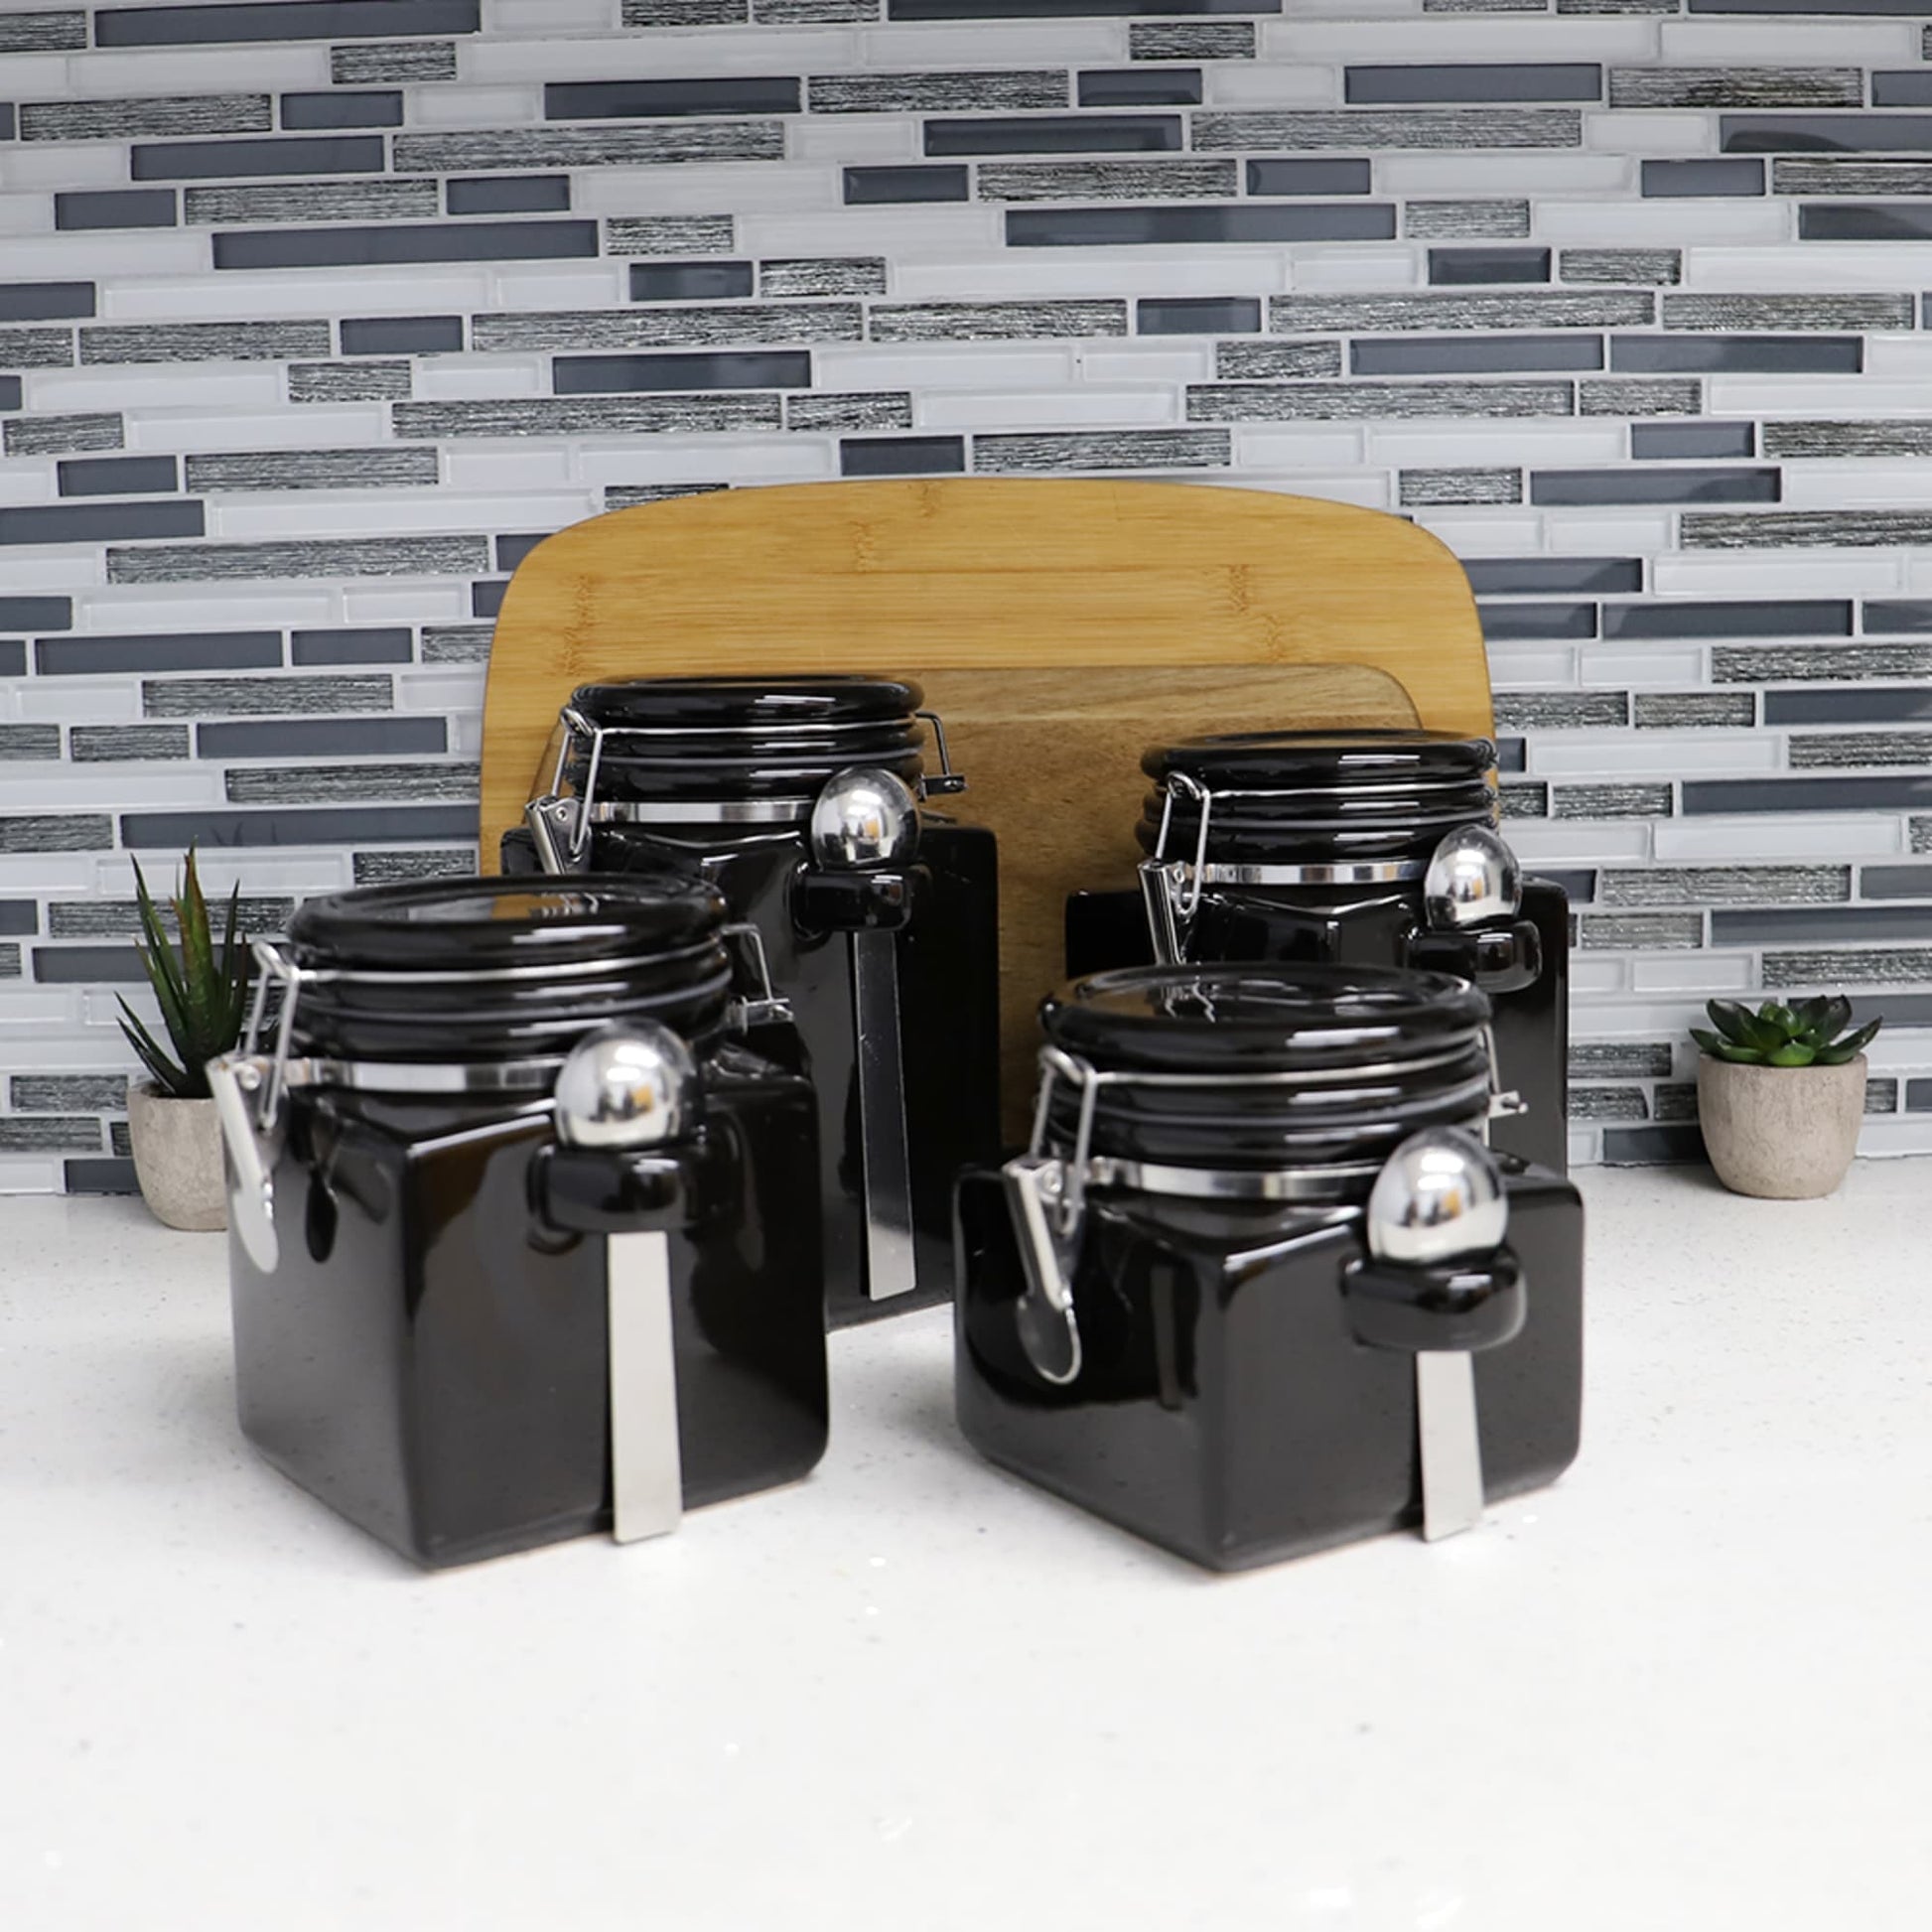 Home Basics 4 Piece Ceramic Canisters with Easy Open Air-Tight Clamp Top  Lid and Wooden Spoons, Black 